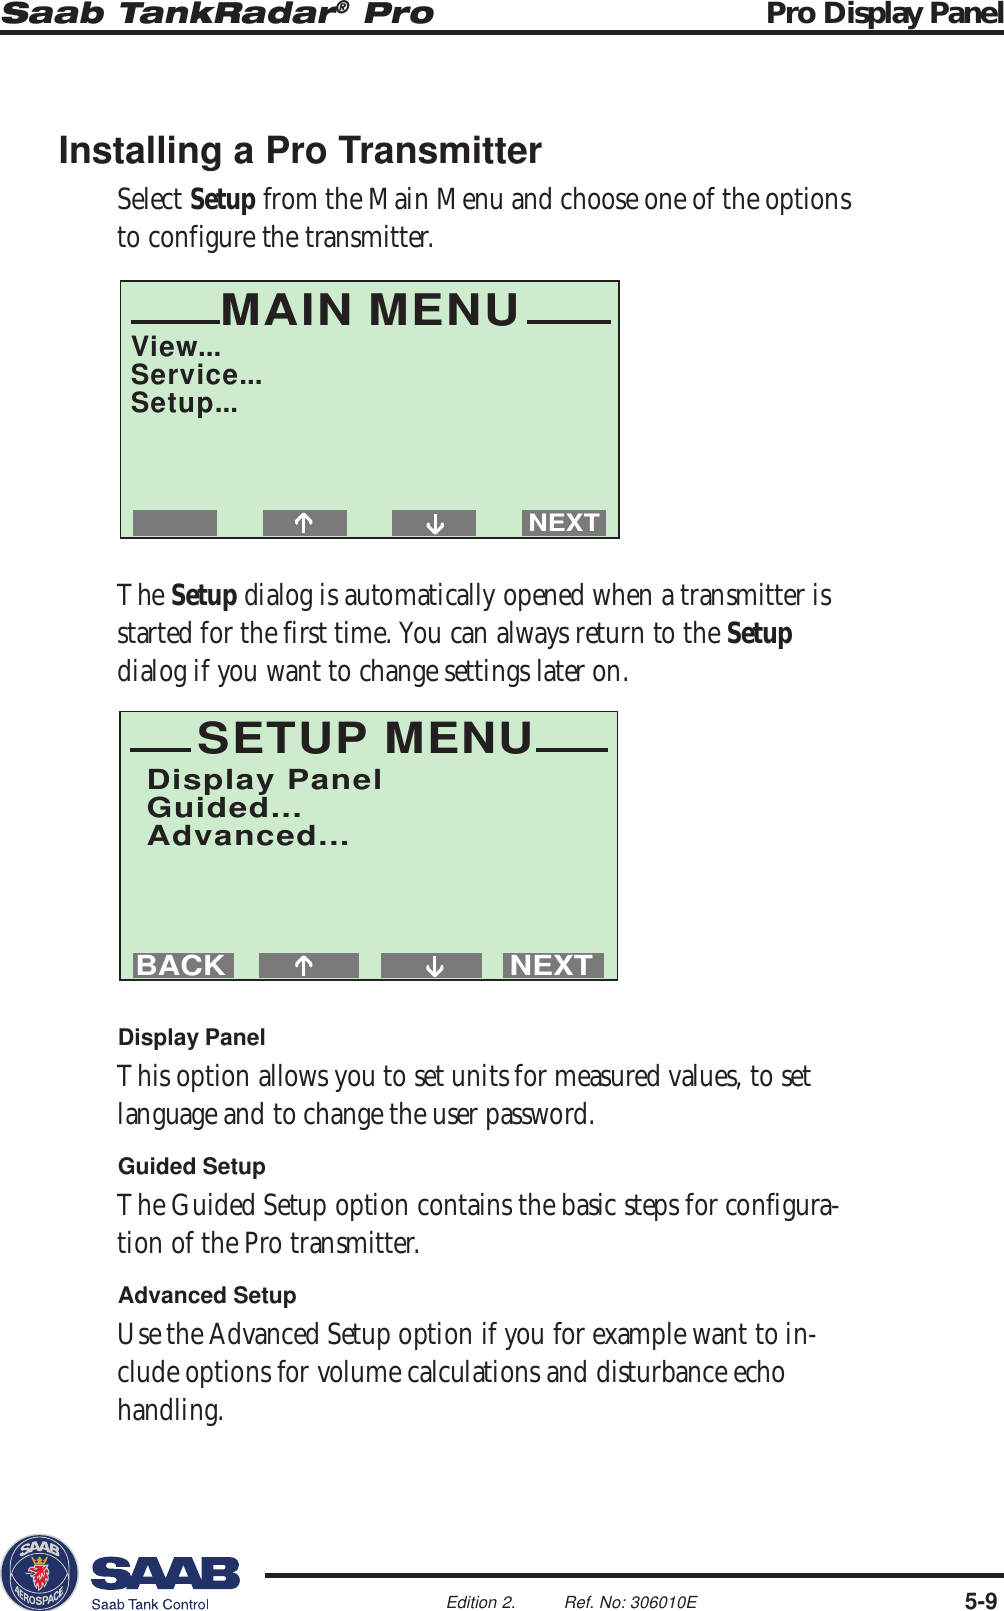 Saab TankRadar® Pro Pro Display Panel5-9Edition 2. Ref. No: 306010ENEXTBACKSETUP MENUDisplay PanelGuided...Advanced...MAIN MENUView...Service...Setup...NEXTInstalling a Pro TransmitterSelect Setup from the Main Menu and choose one of the optionsto configure the transmitter.The Setup dialog is automatically opened when a transmitter isstarted for the first time. You can always return to the Setupdialog if you want to change settings later on.Display PanelThis option allows you to set units for measured values, to setlanguage and to change the user password.Guided SetupThe Guided Setup option contains the basic steps for configura-tion of the Pro transmitter.Advanced SetupUse the Advanced Setup option if you for example want to in-clude options for volume calculations and disturbance echohandling.